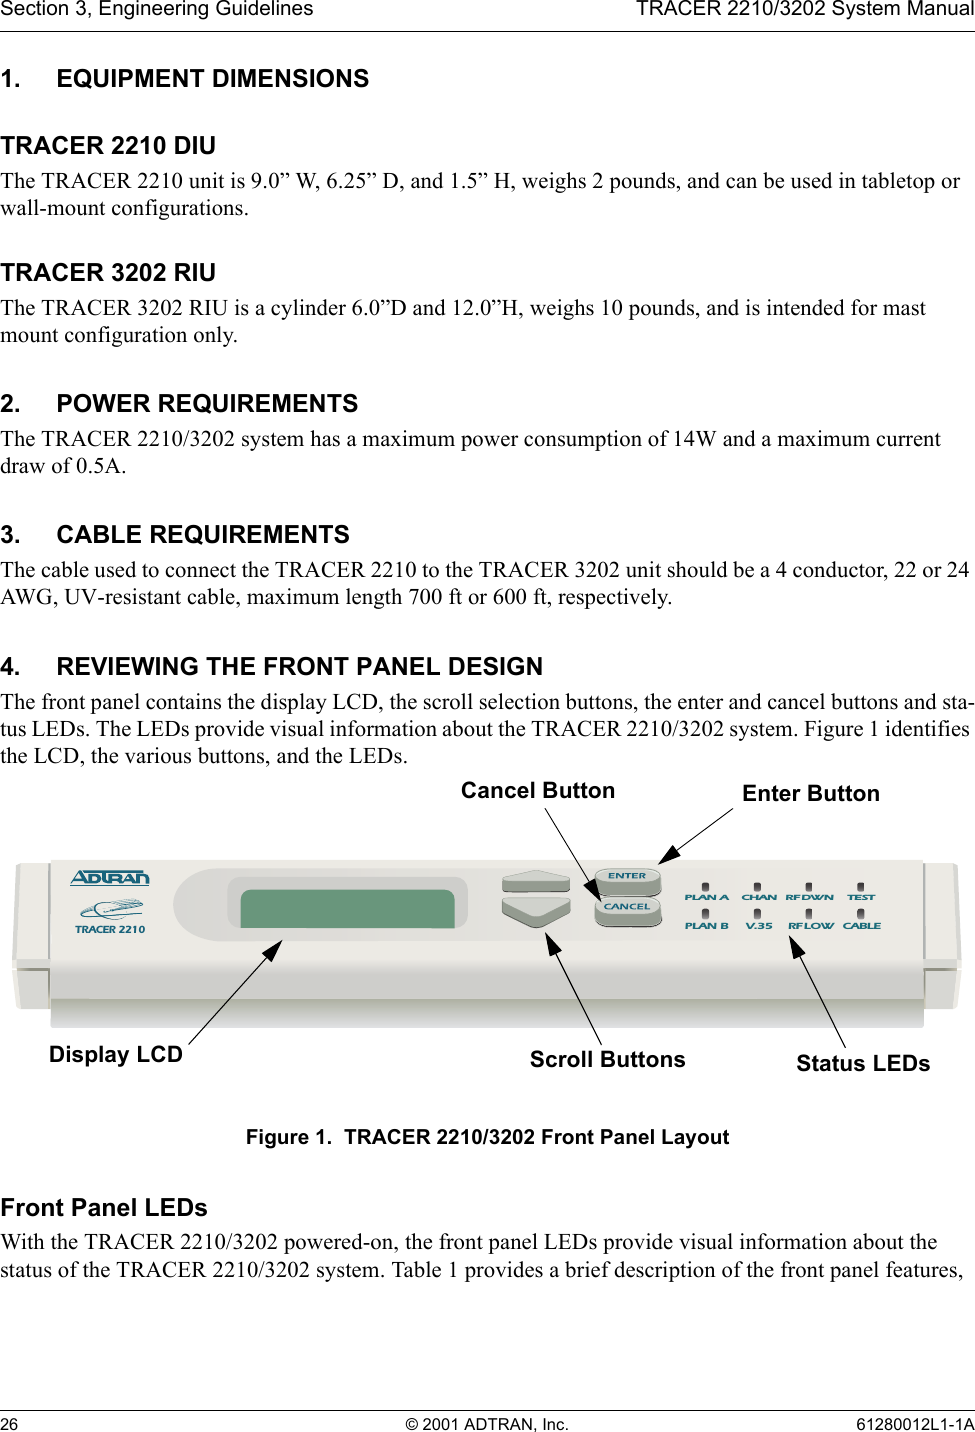 Section 3, Engineering Guidelines TRACER 2210/3202 System Manual26 © 2001 ADTRAN, Inc. 61280012L1-1A1. EQUIPMENT DIMENSIONSTRACER 2210 DIUThe TRACER 2210 unit is 9.0” W, 6.25” D, and 1.5” H, weighs 2 pounds, and can be used in tabletop or wall-mount configurations.TRACER 3202 RIUThe TRACER 3202 RIU is a cylinder 6.0”D and 12.0”H, weighs 10 pounds, and is intended for mast mount configuration only.2. POWER REQUIREMENTSThe TRACER 2210/3202 system has a maximum power consumption of 14W and a maximum current draw of 0.5A.3. CABLE REQUIREMENTSThe cable used to connect the TRACER 2210 to the TRACER 3202 unit should be a 4 conductor, 22 or 24 AWG, UV-resistant cable, maximum length 700 ft or 600 ft, respectively.4. REVIEWING THE FRONT PANEL DESIGNThe front panel contains the display LCD, the scroll selection buttons, the enter and cancel buttons and sta-tus LEDs. The LEDs provide visual information about the TRACER 2210/3202 system. Figure 1 identifies the LCD, the various buttons, and the LEDs.Figure 1.  TRACER 2210/3202 Front Panel LayoutFront Panel LEDsWith the TRACER 2210/3202 powered-on, the front panel LEDs provide visual information about the status of the TRACER 2210/3202 system. Table 1 provides a brief description of the front panel features, TRACER 2210PLAN BPLAN A  CHAN RF DWN TEST V.35  RF LOW  CABLEDisplay LCD Scroll Buttons Status LEDsEnter ButtonCancel Button